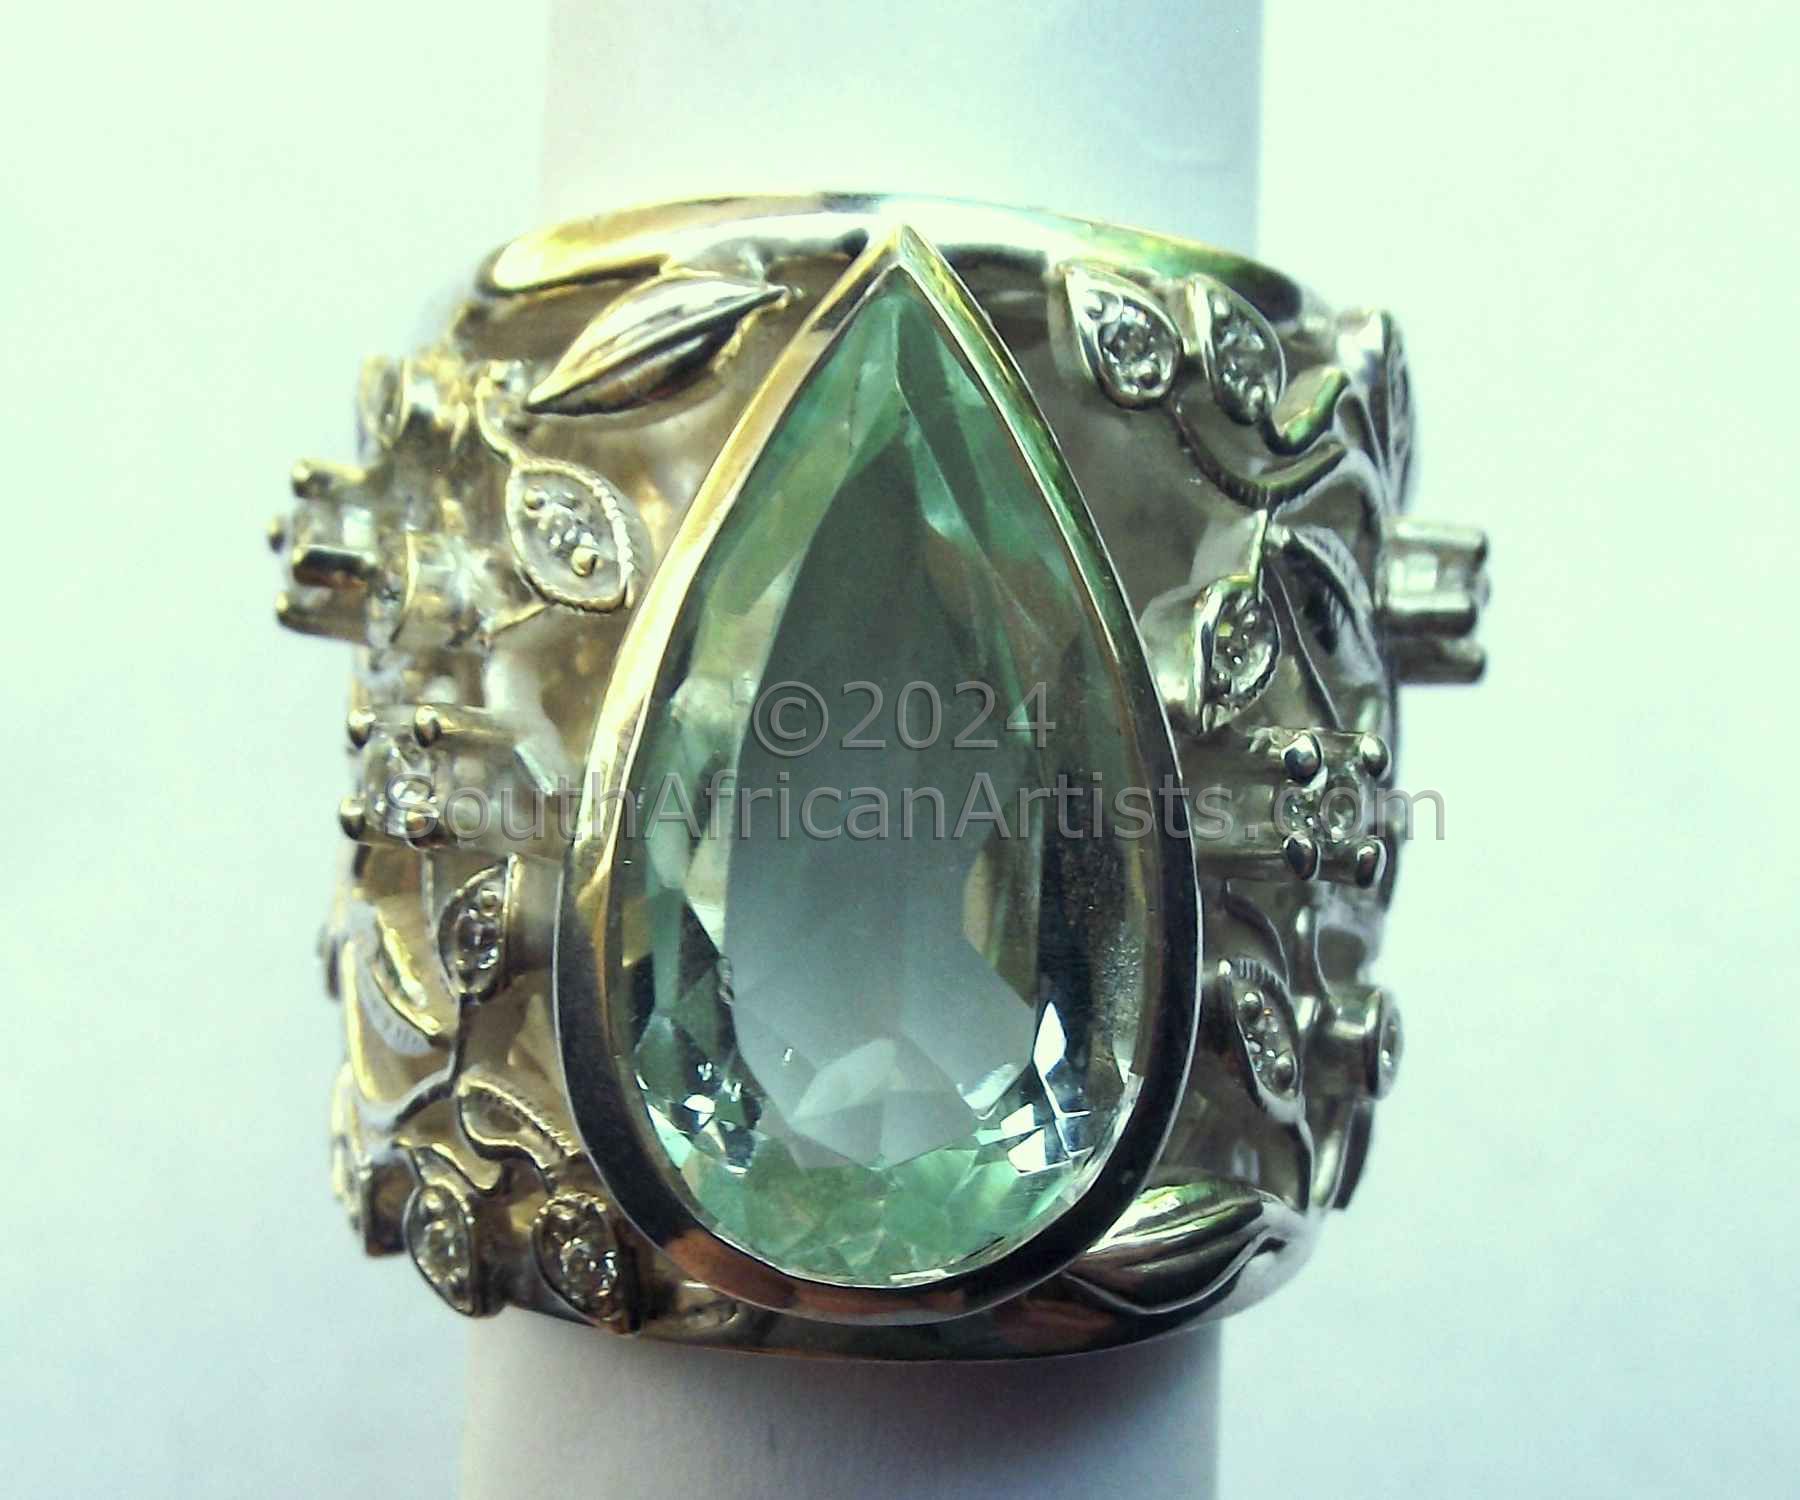 Vine and Branches Ring